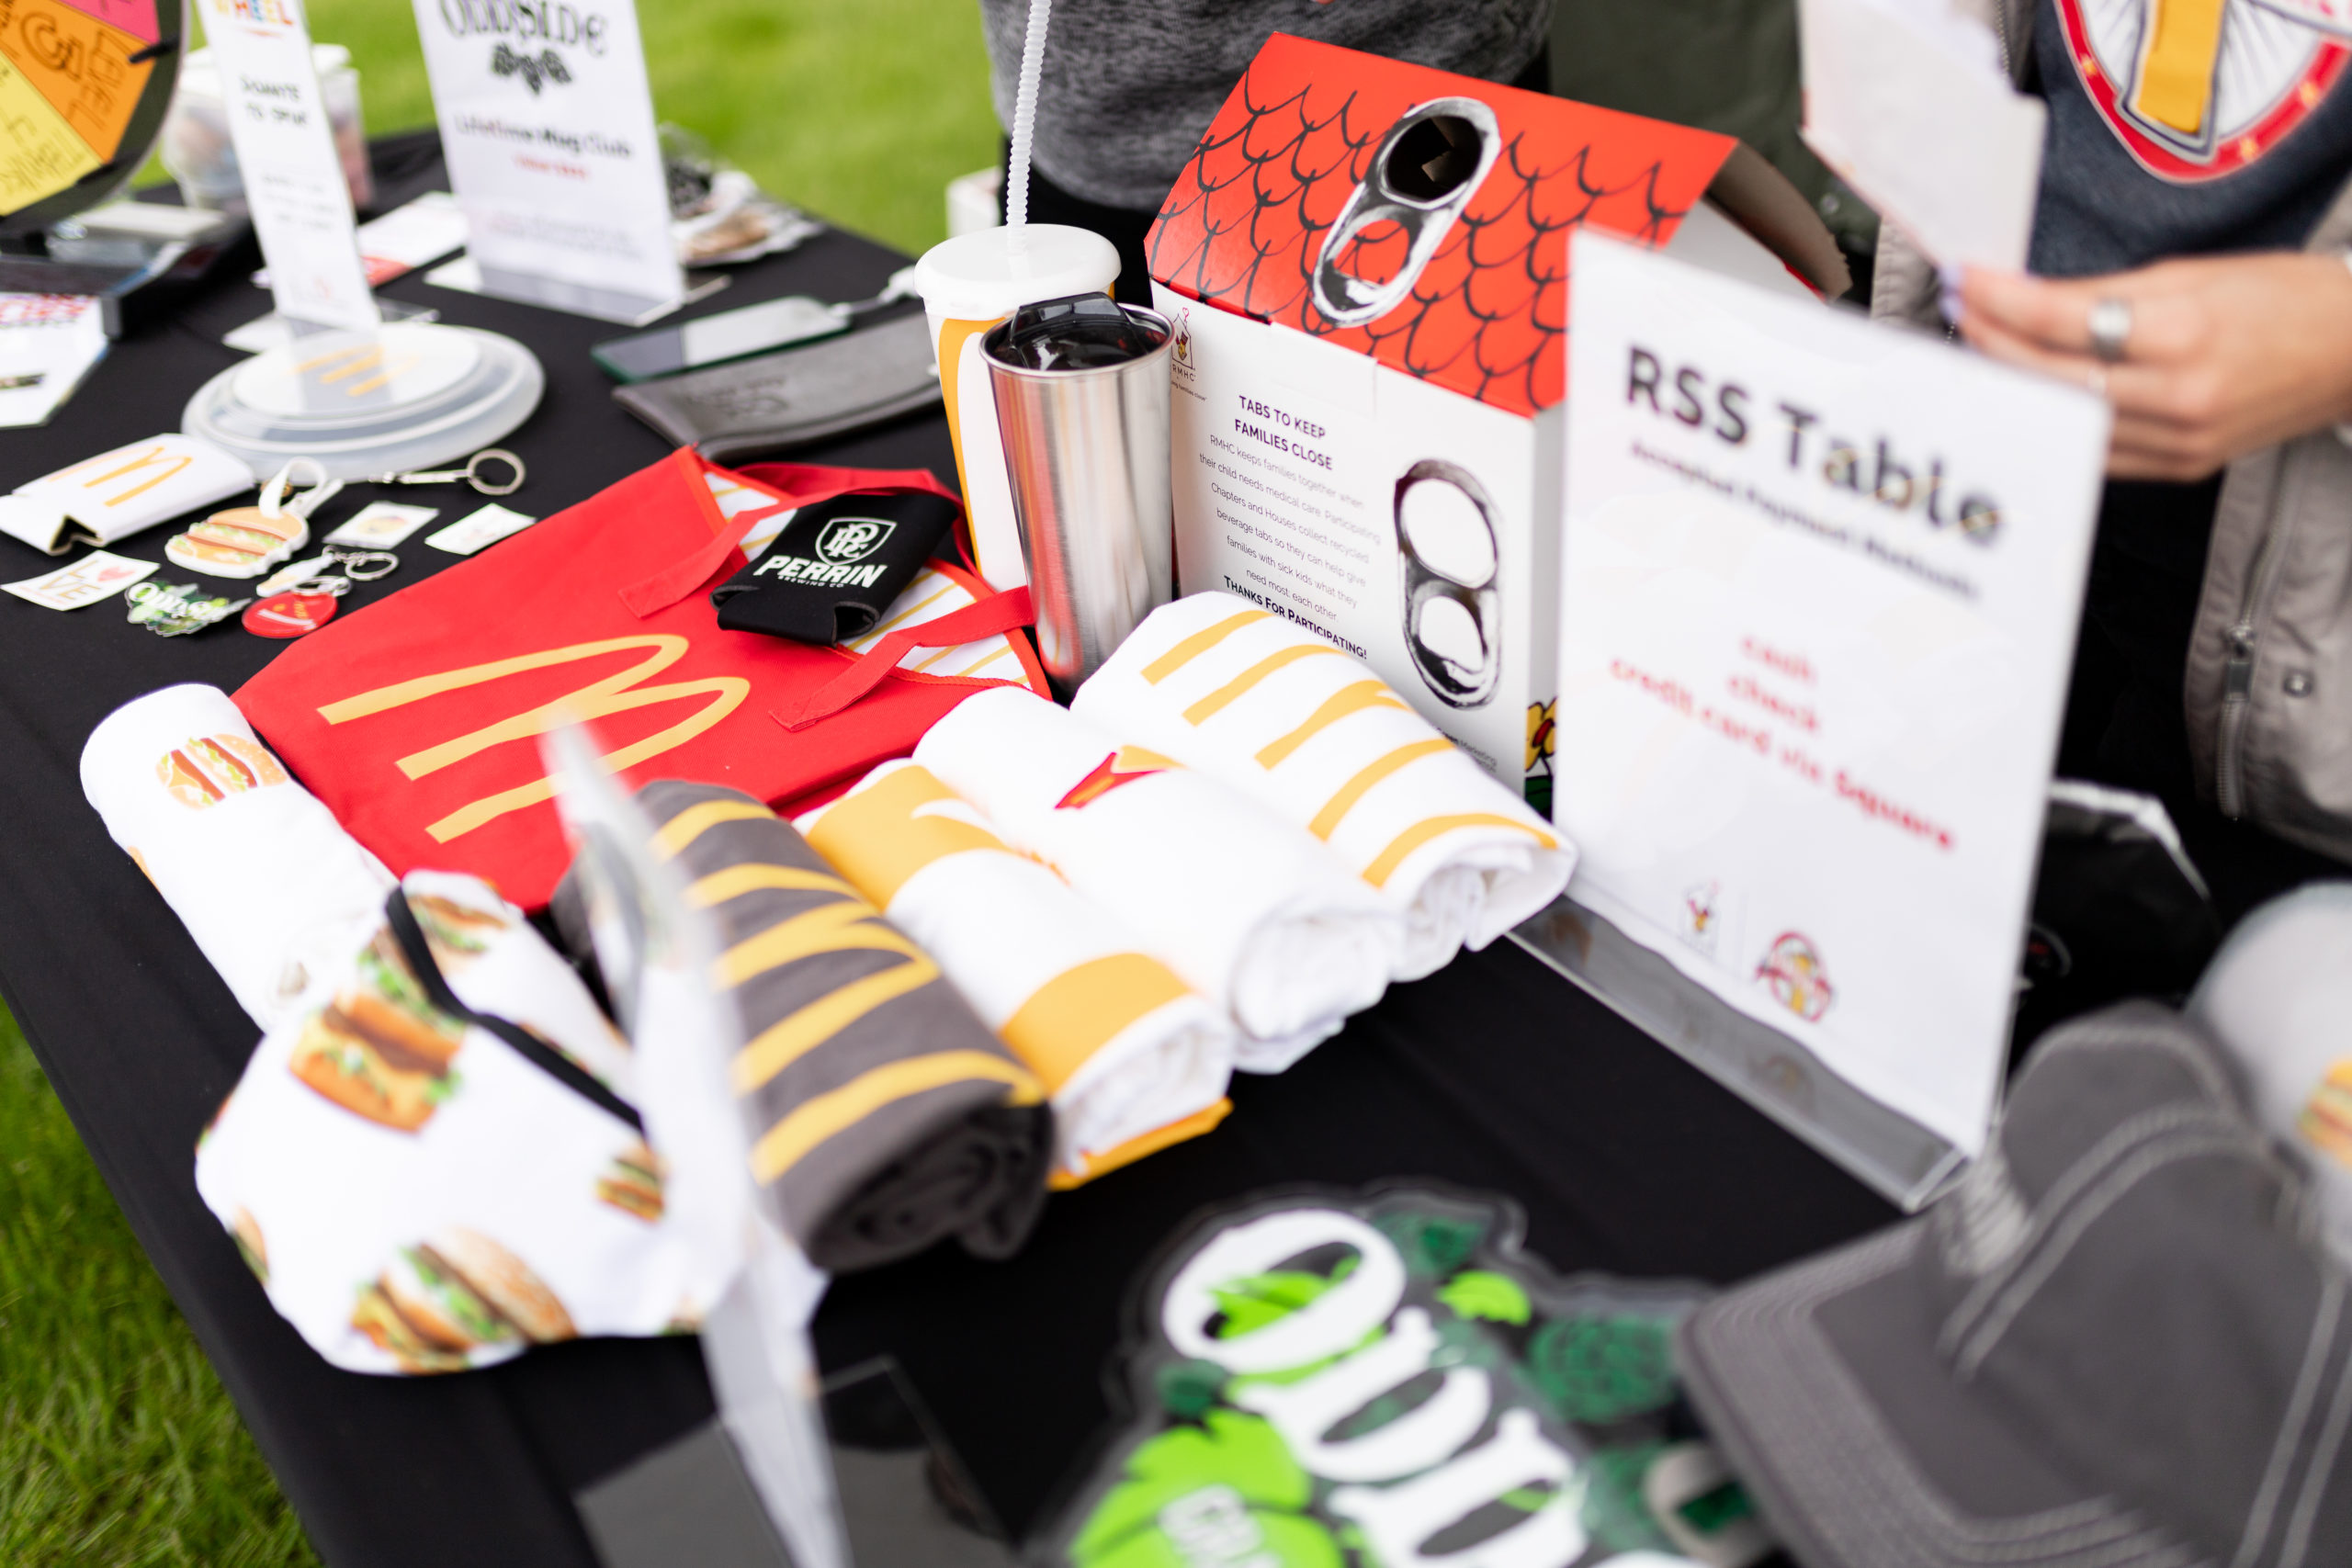 Red Shoe Society Swag Table